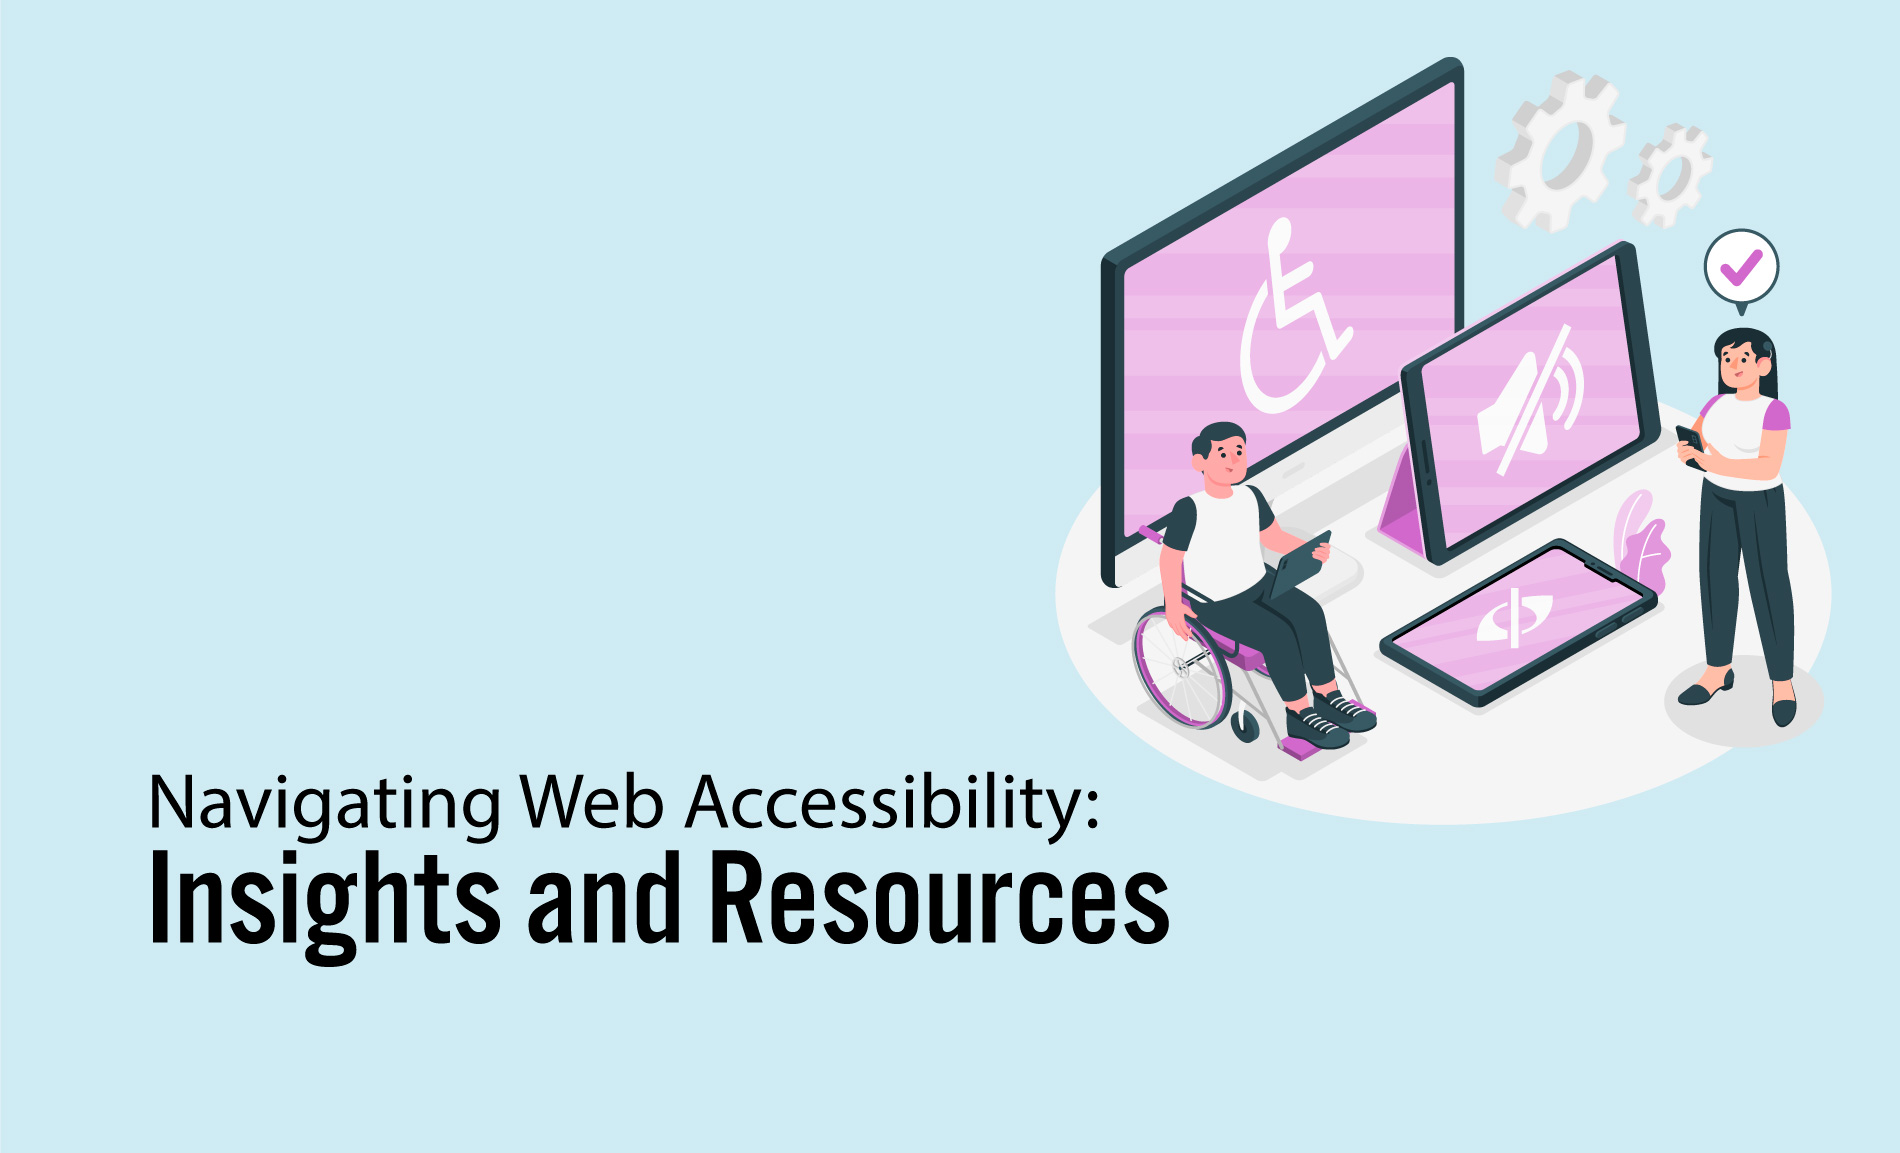 Navigating Web Accessibility: Insights and Resources